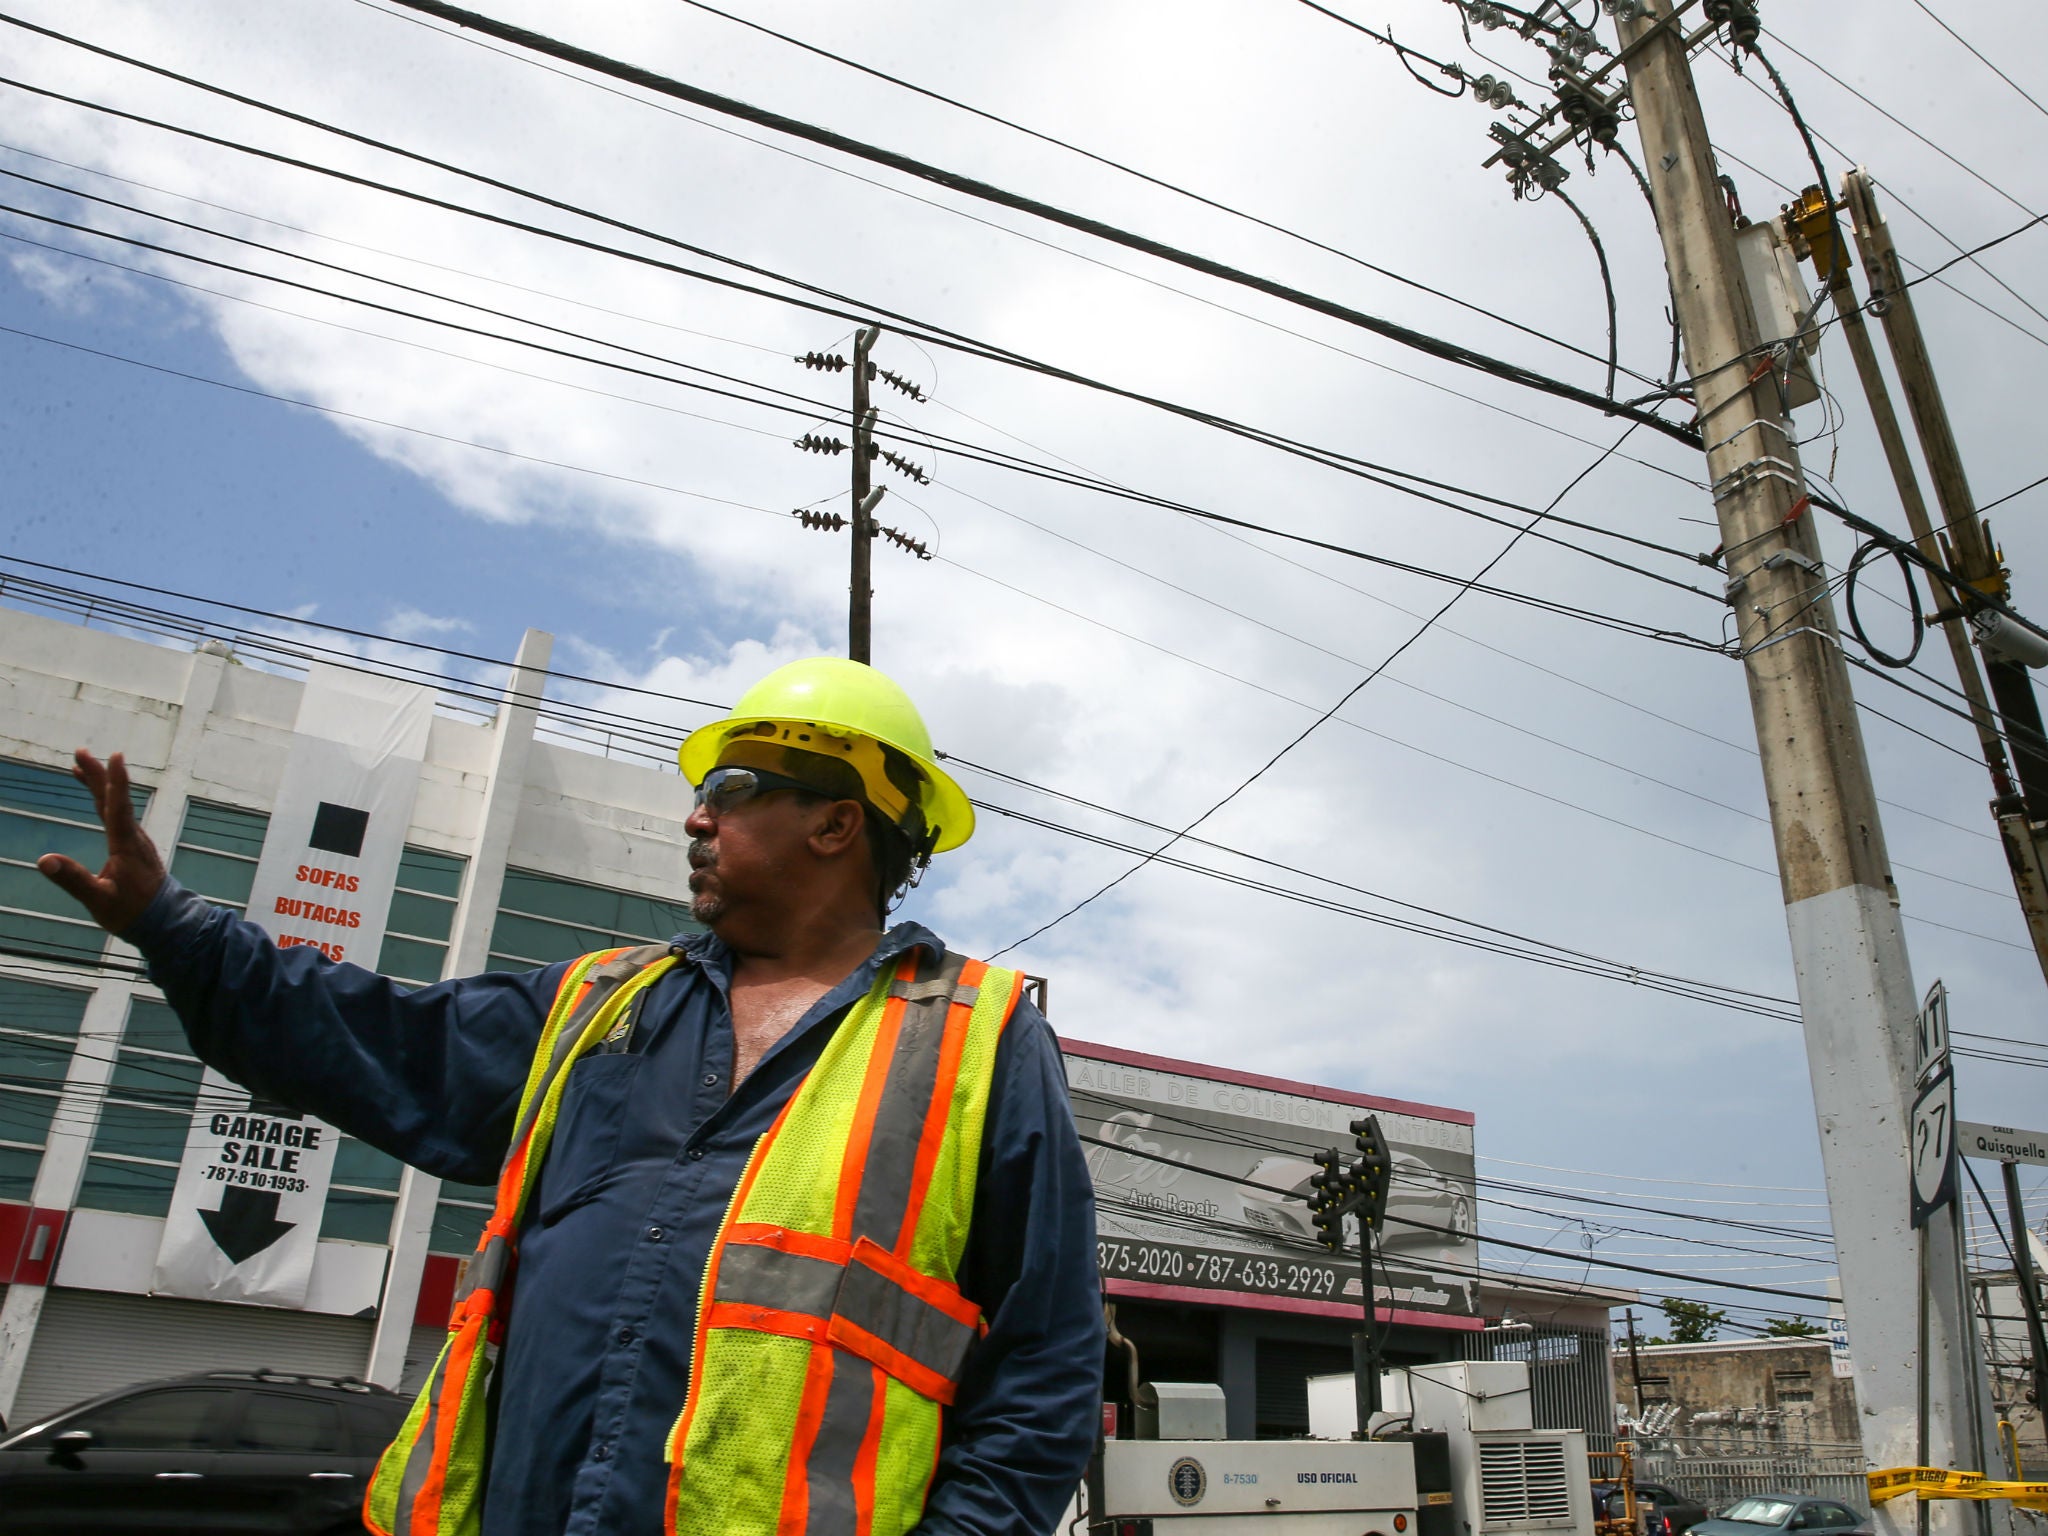 An employee of the Puerto Rico Electric Power Authority during repair work on power lines affected by Hurricane Maria in San Juan, Puerto Rico